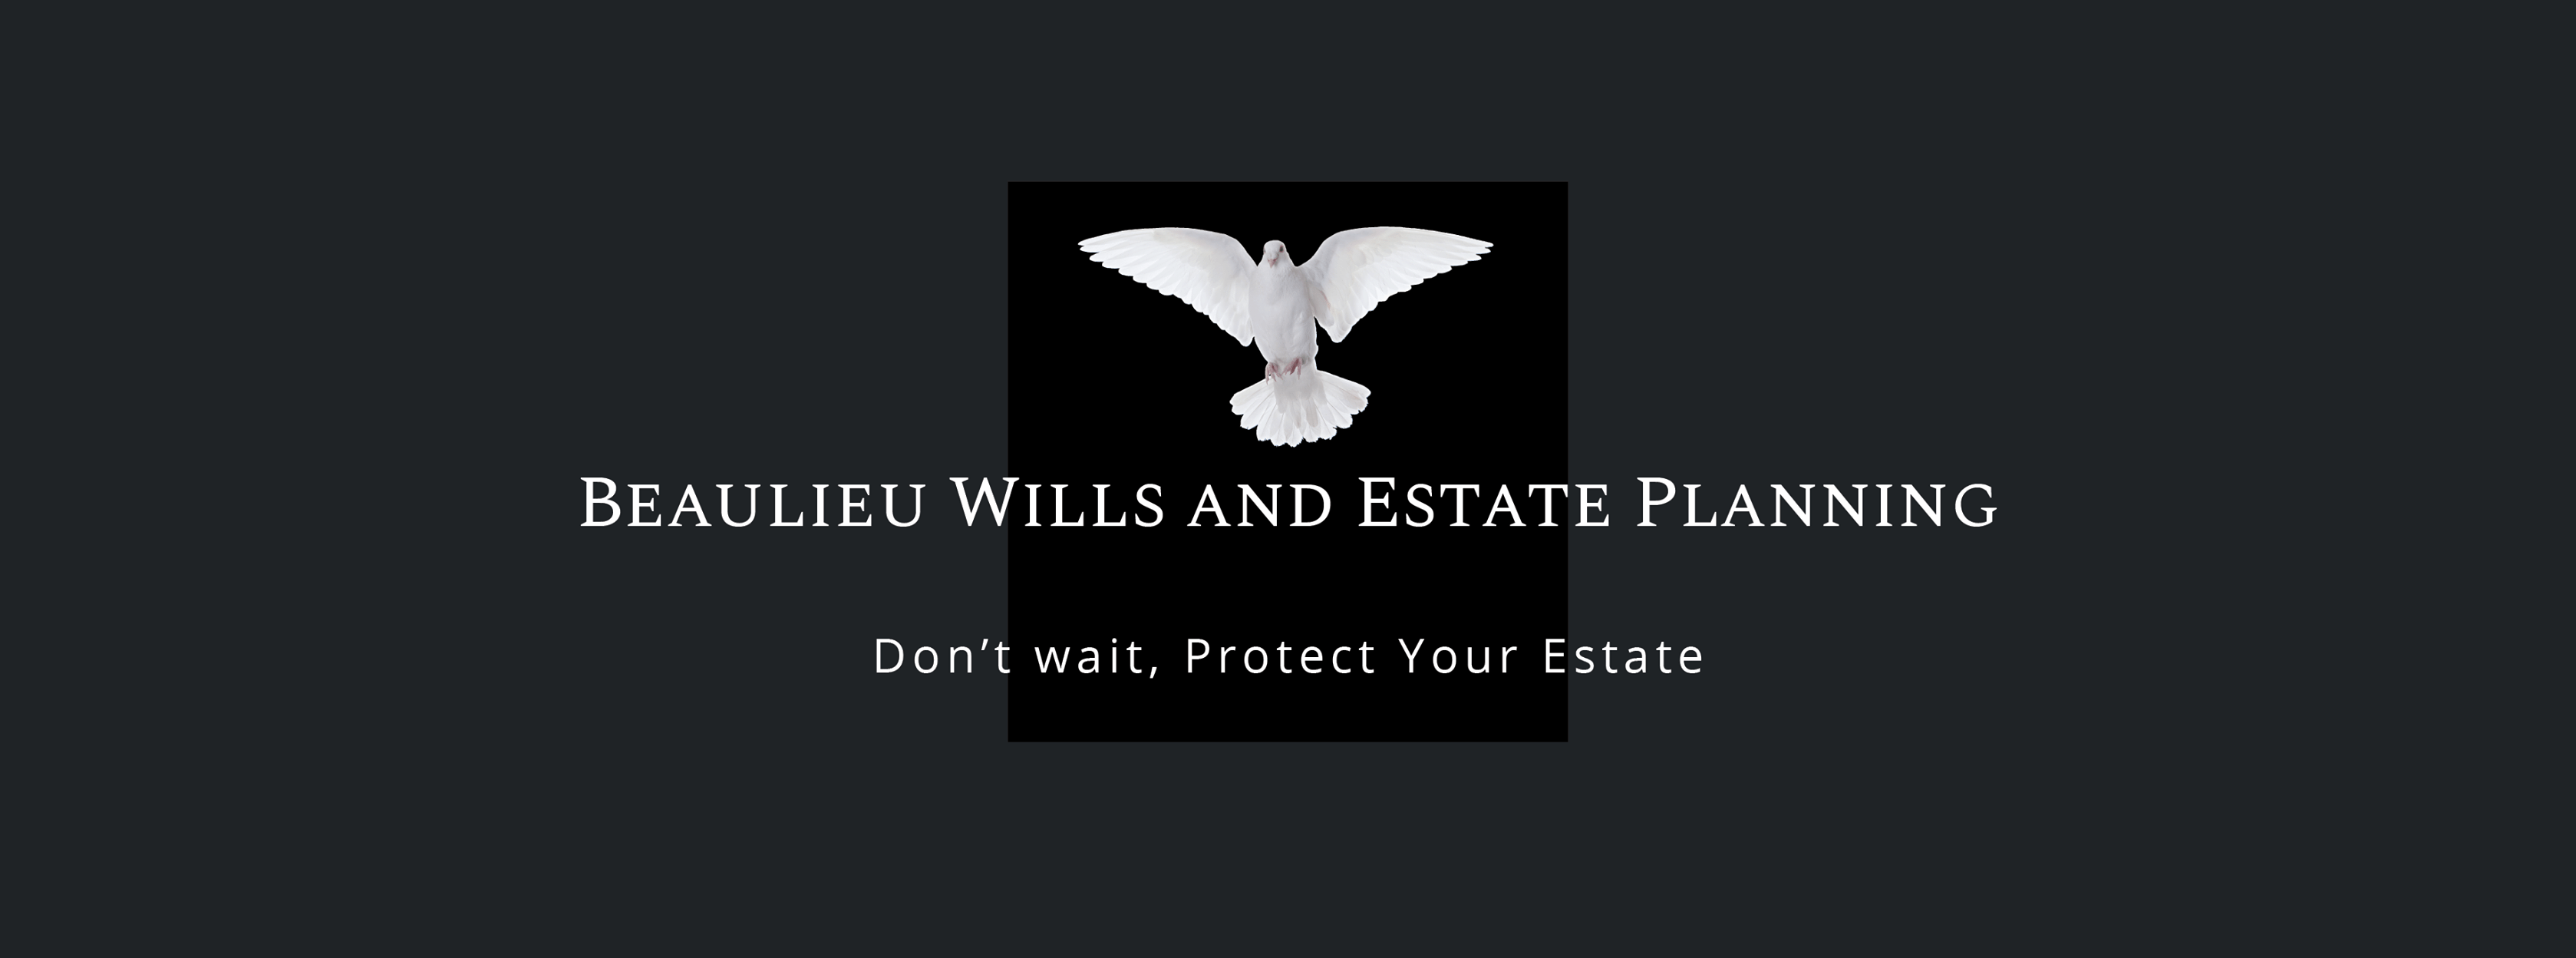 Beaulieu Wills and Estate Planning - Exhibitor at Essex Property Show